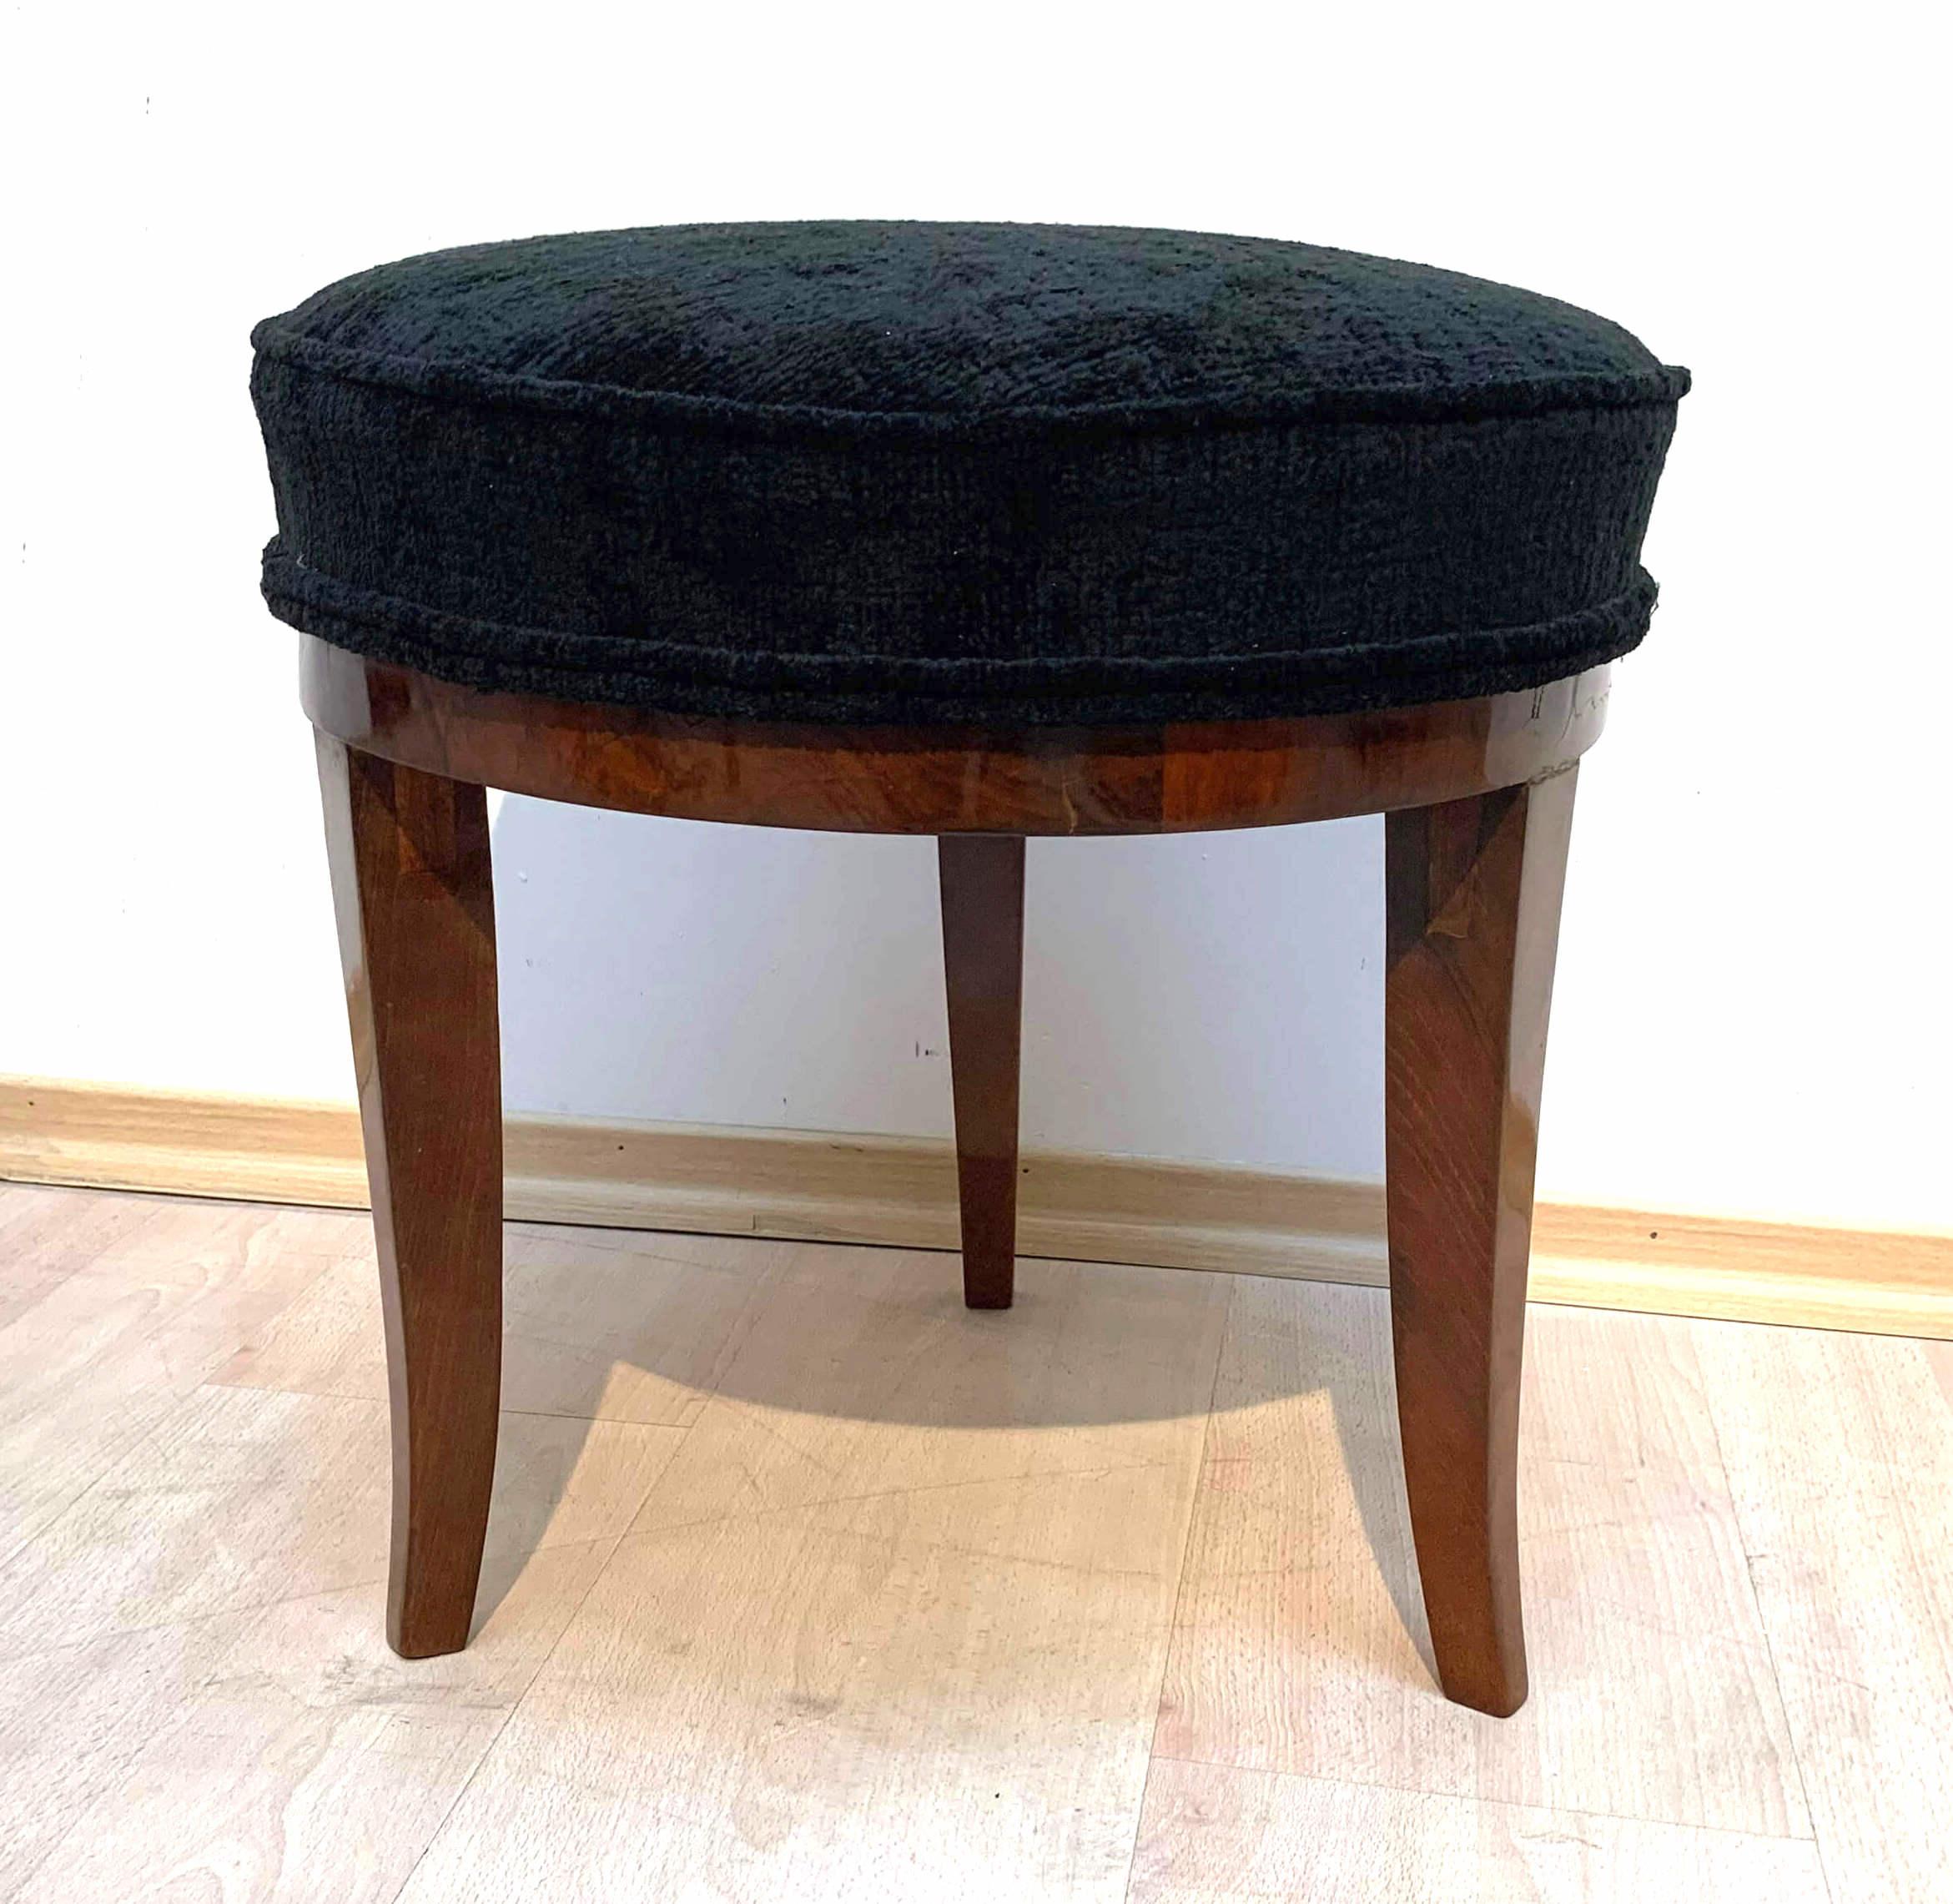 Round early Biedermeier stool from South Germany circa 1820.

Wood: walnut veneer, shellac hand-polished (French Polish).
Three cureved, square-tapered legs.
Newly upholstered with black mottled velvet fabric and double keder.